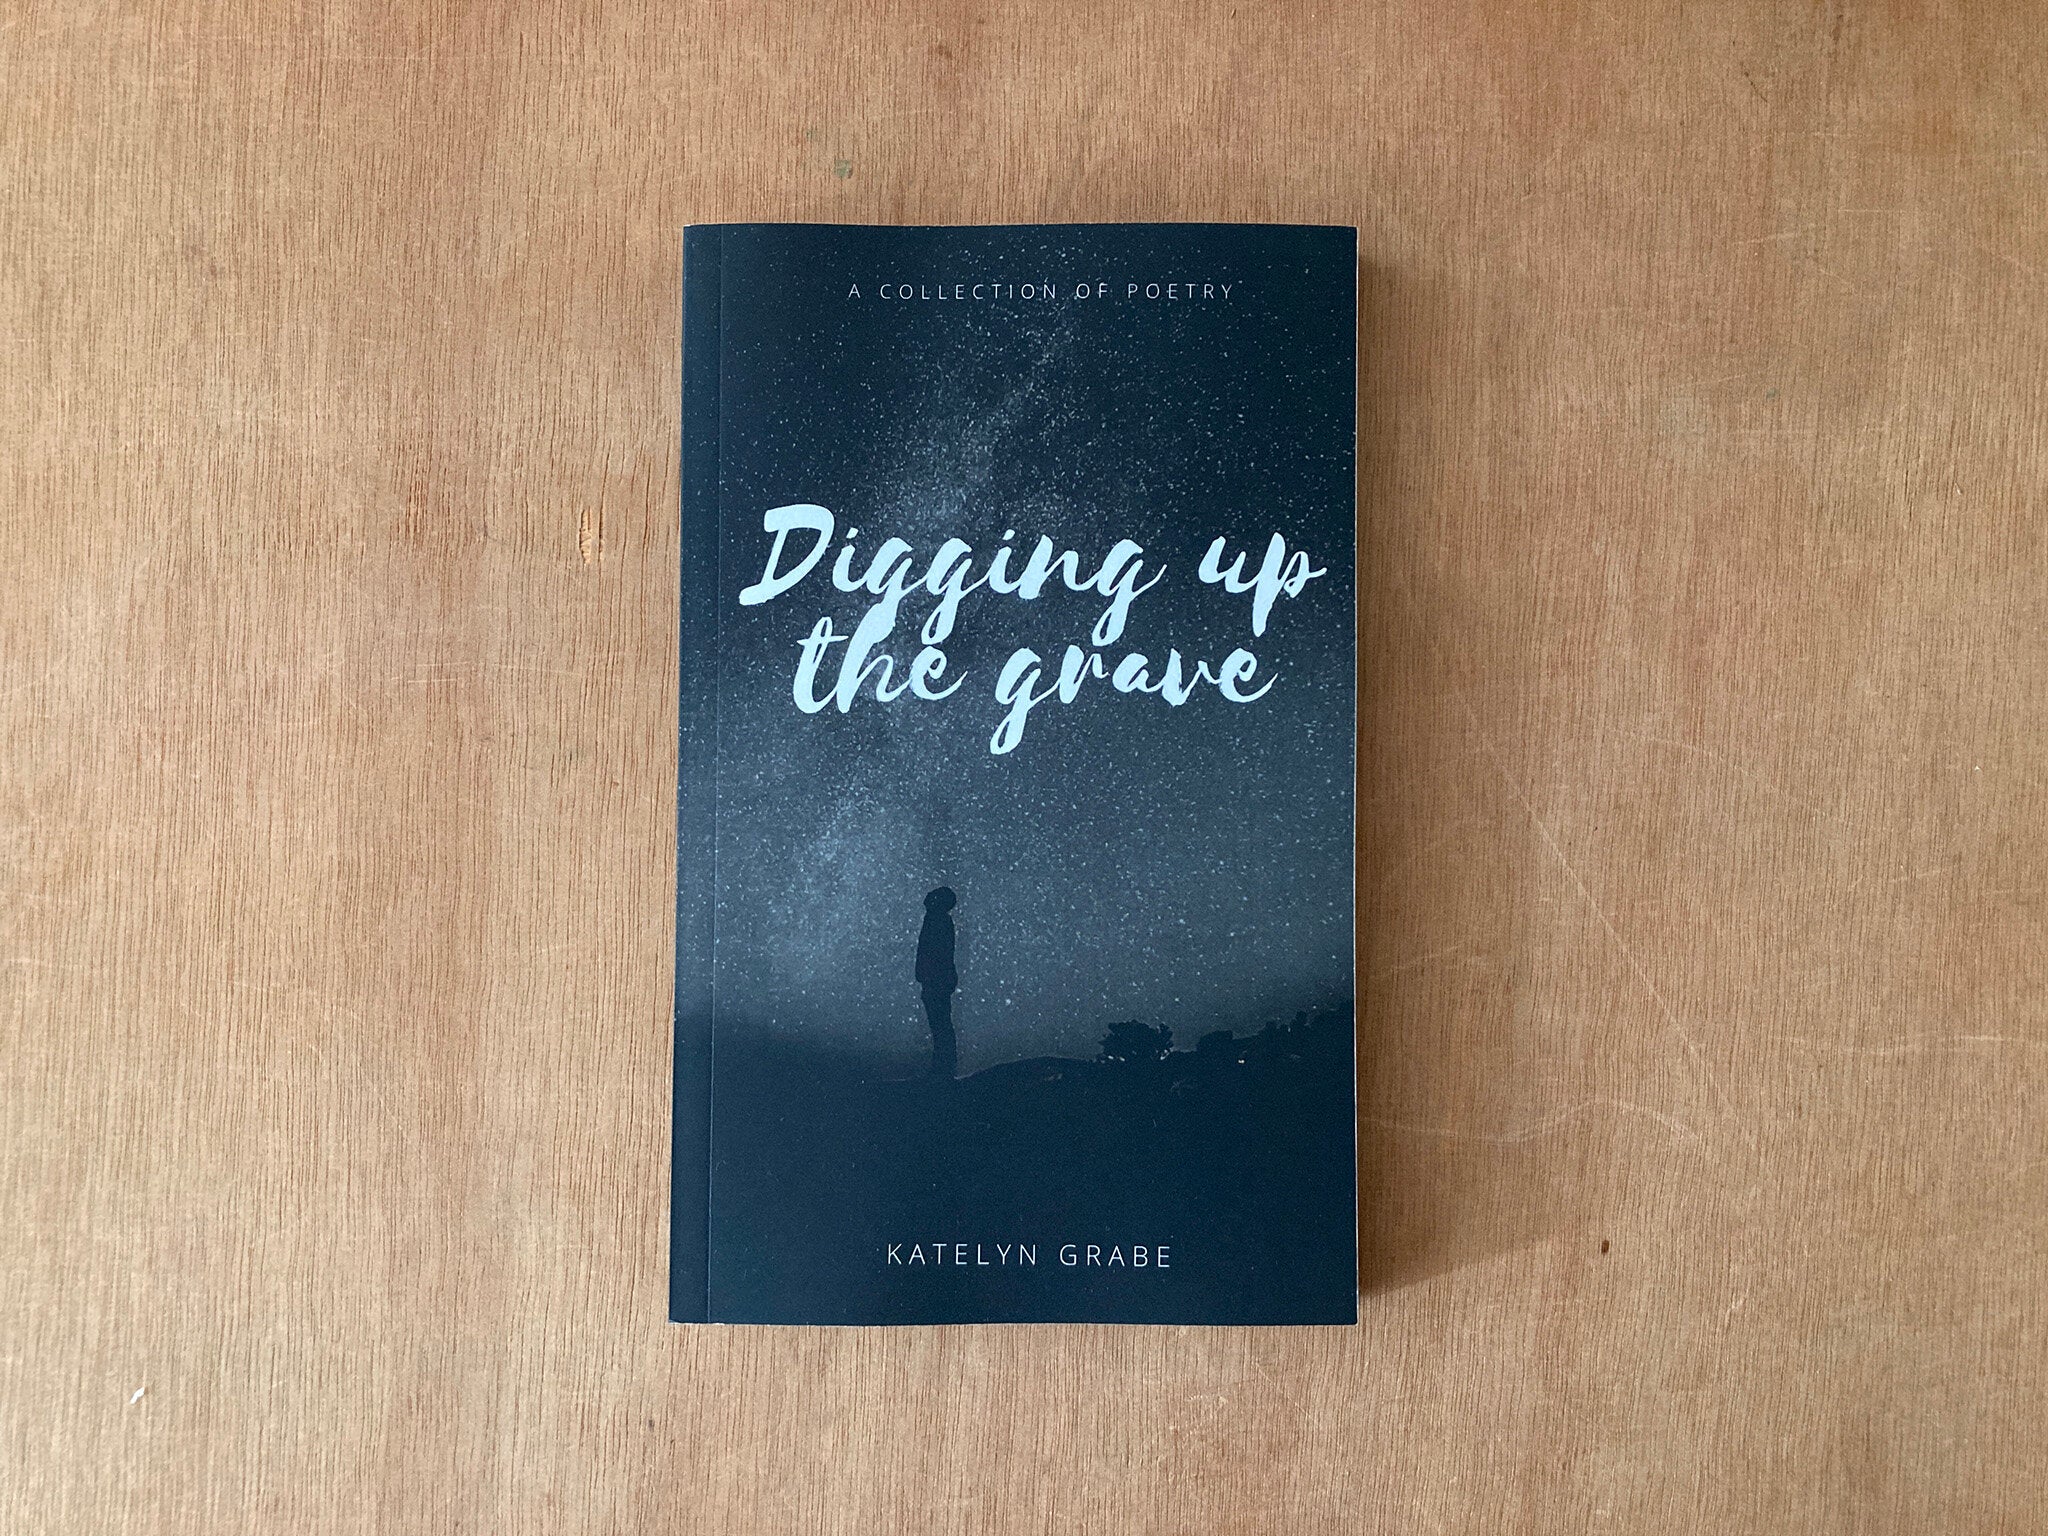 DIGGING UP THE GRAVE by Katelyn Grabe